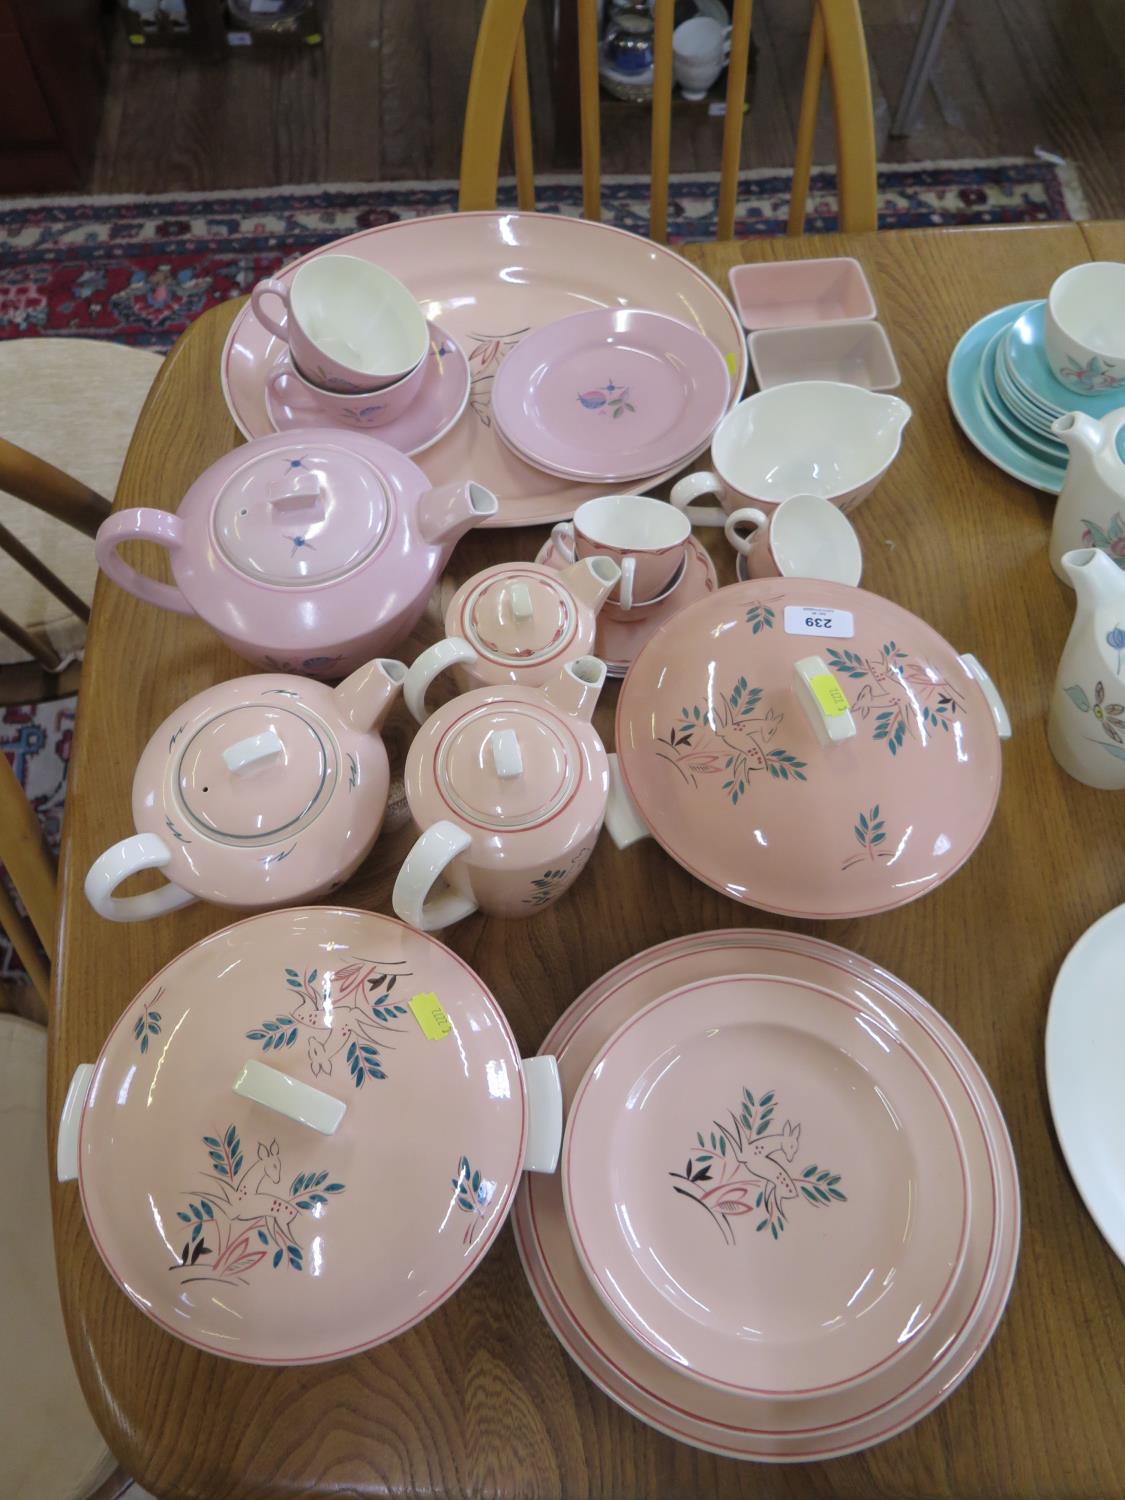 Poole Pottery dinner and tea wares in pink, including Leaping deer pattern, and others